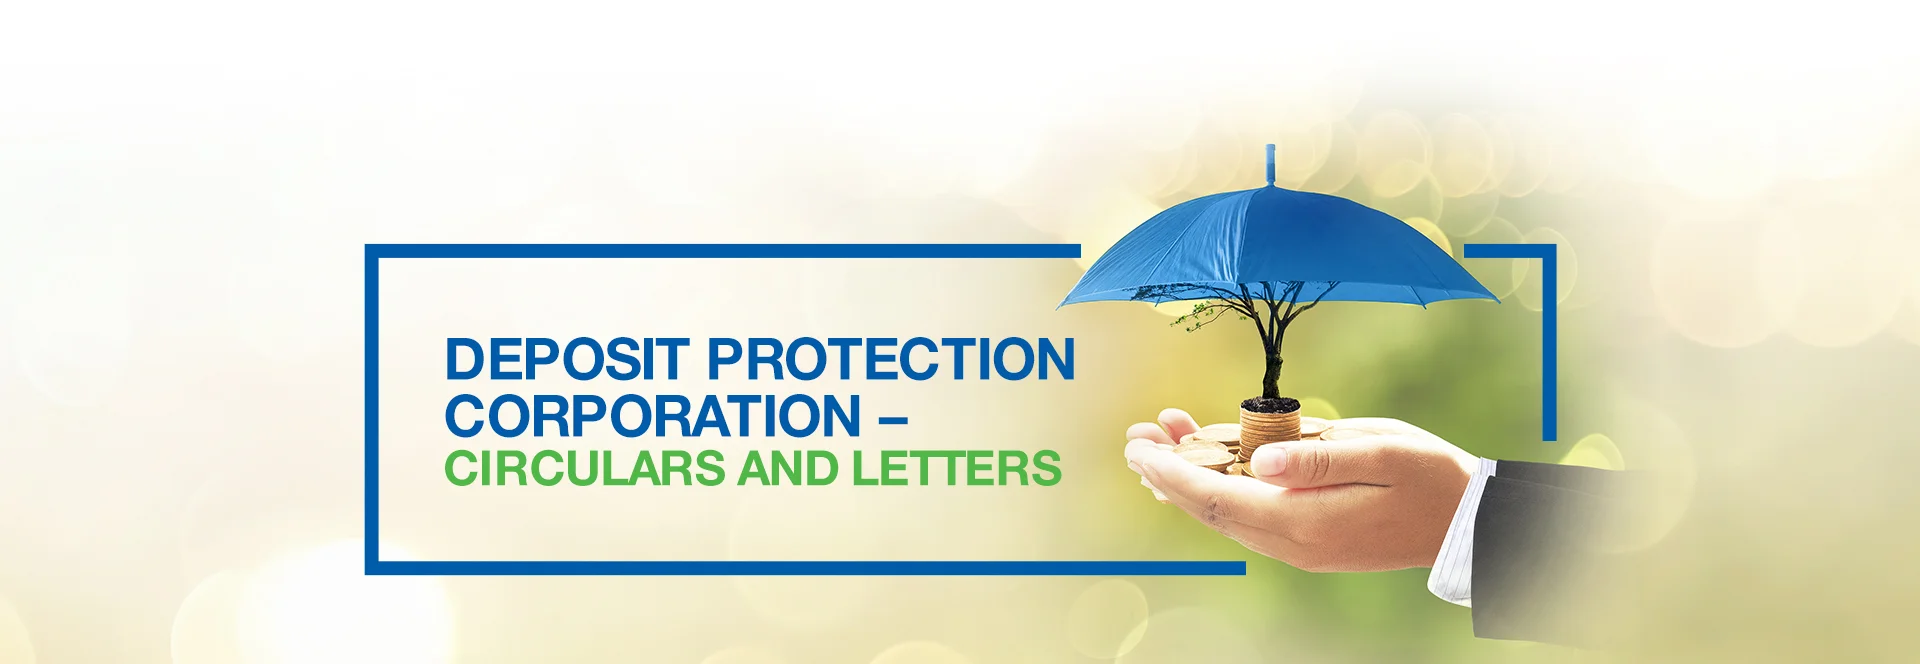 Deposit Protection Corporation - Circulars and Letters